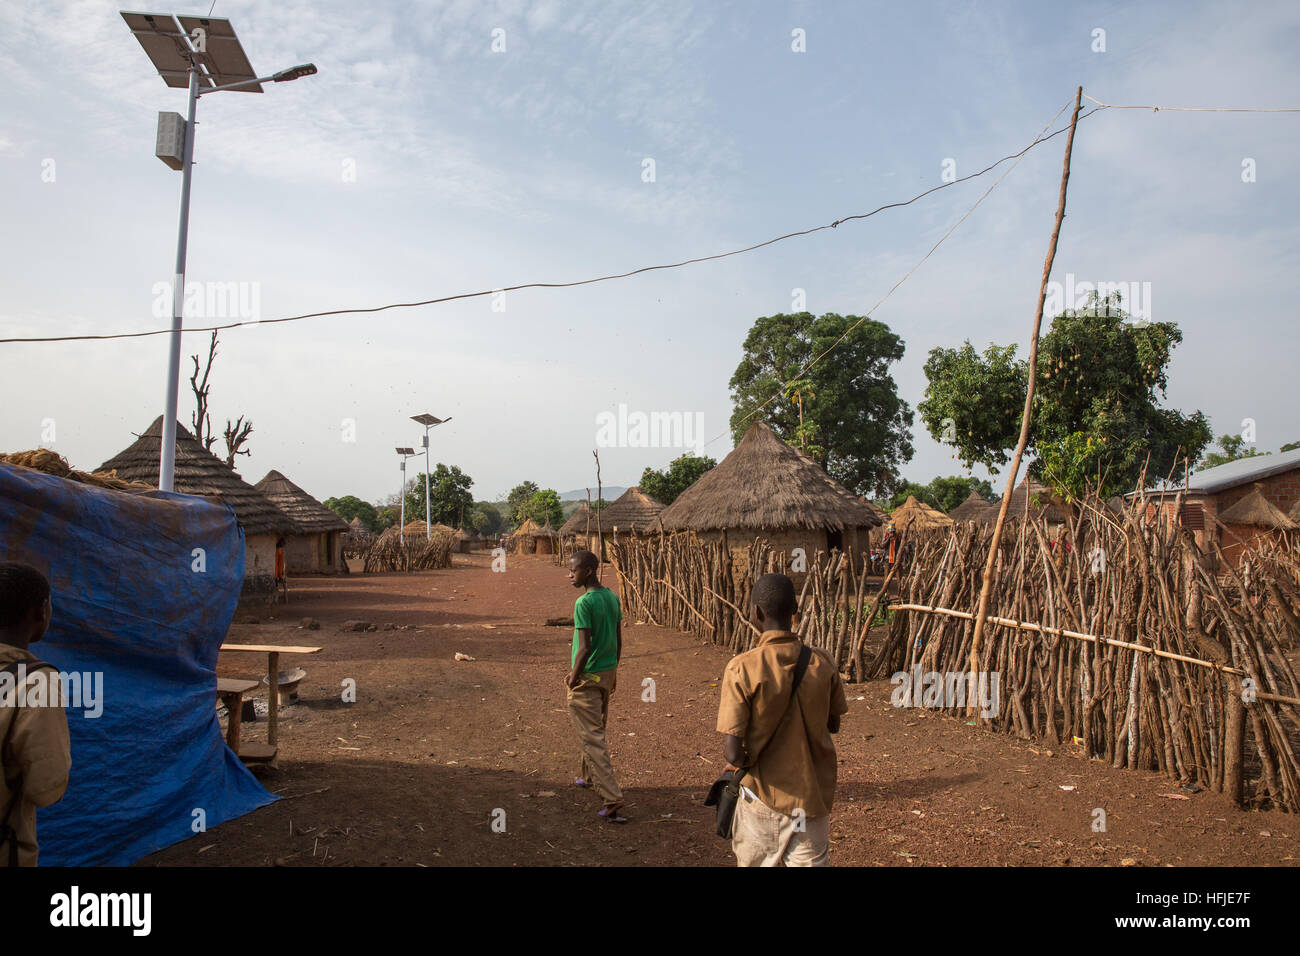 Gbderedou Baranama, Guinea, 2nd May 2015; This village and local area will be flooded by the dam. Solar-powered street lighting recently installed. Stock Photo